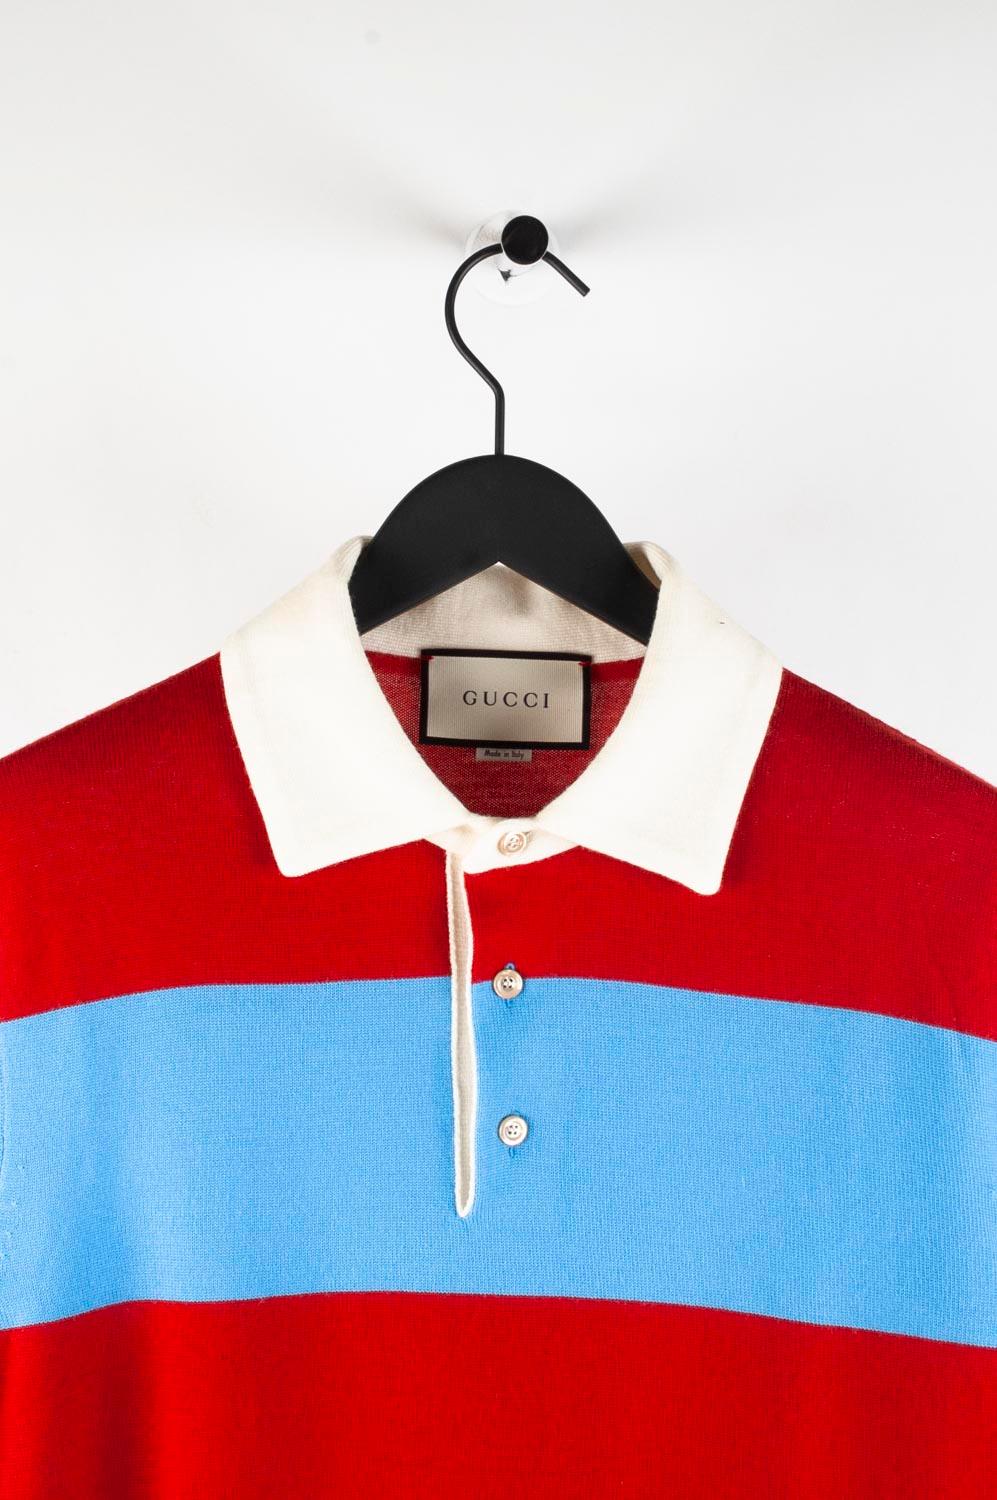 Item for sale is 100% genuine Gucci Thanatos Wool Men Sweater, M S519
Color: Blue/red
(An actual color may a bit vary due to individual computer screen interpretation)
Material: 100% wool
Tag size: M S519
This sweater is great quality item. Rate 9